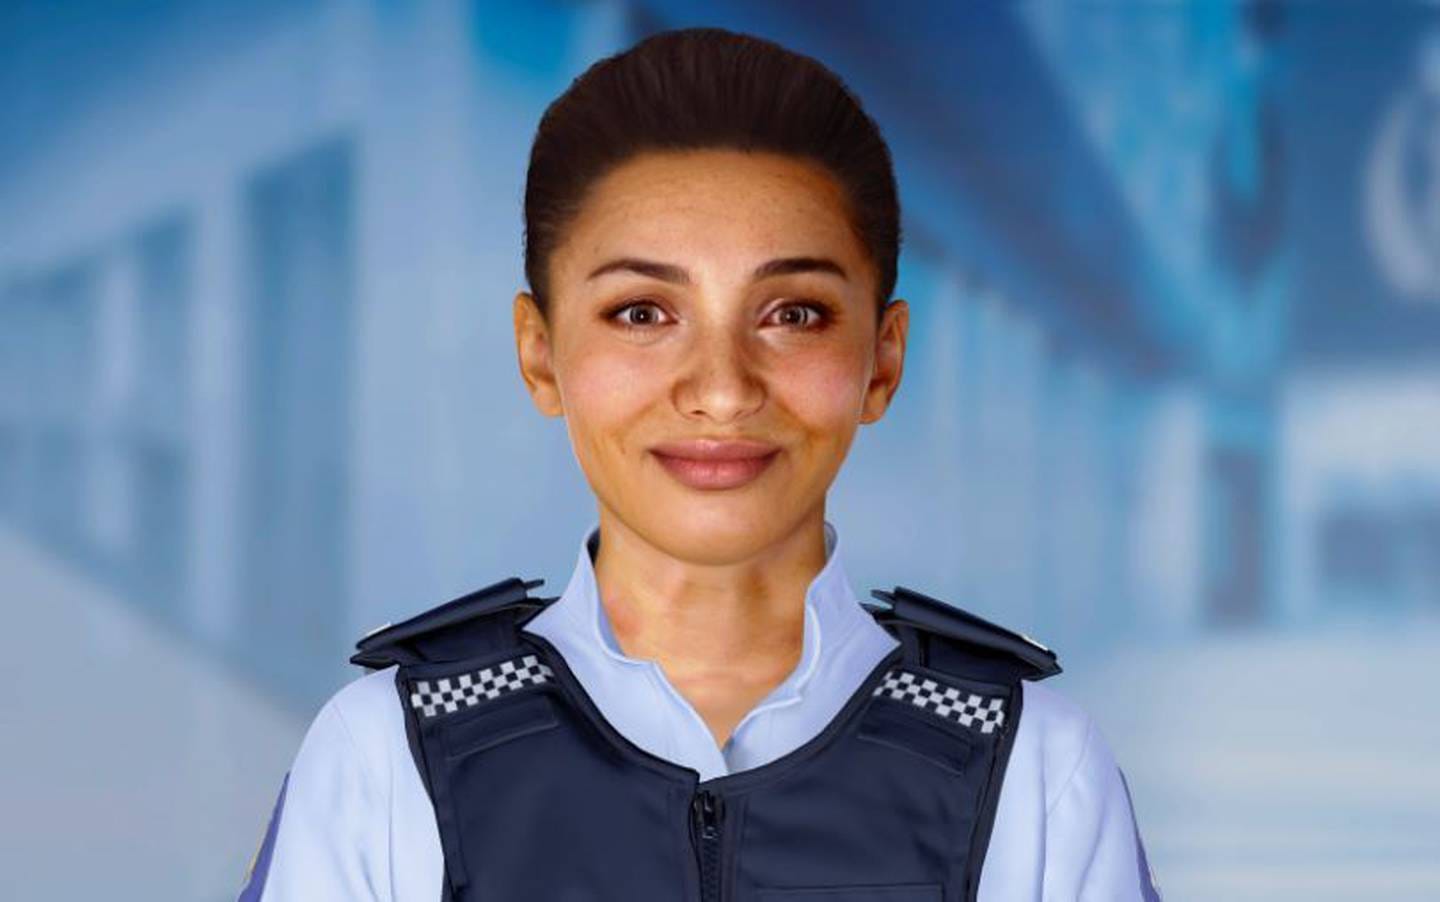 Meet the new face of New Zealand Police, AI officer Ella. Photo / Supplied